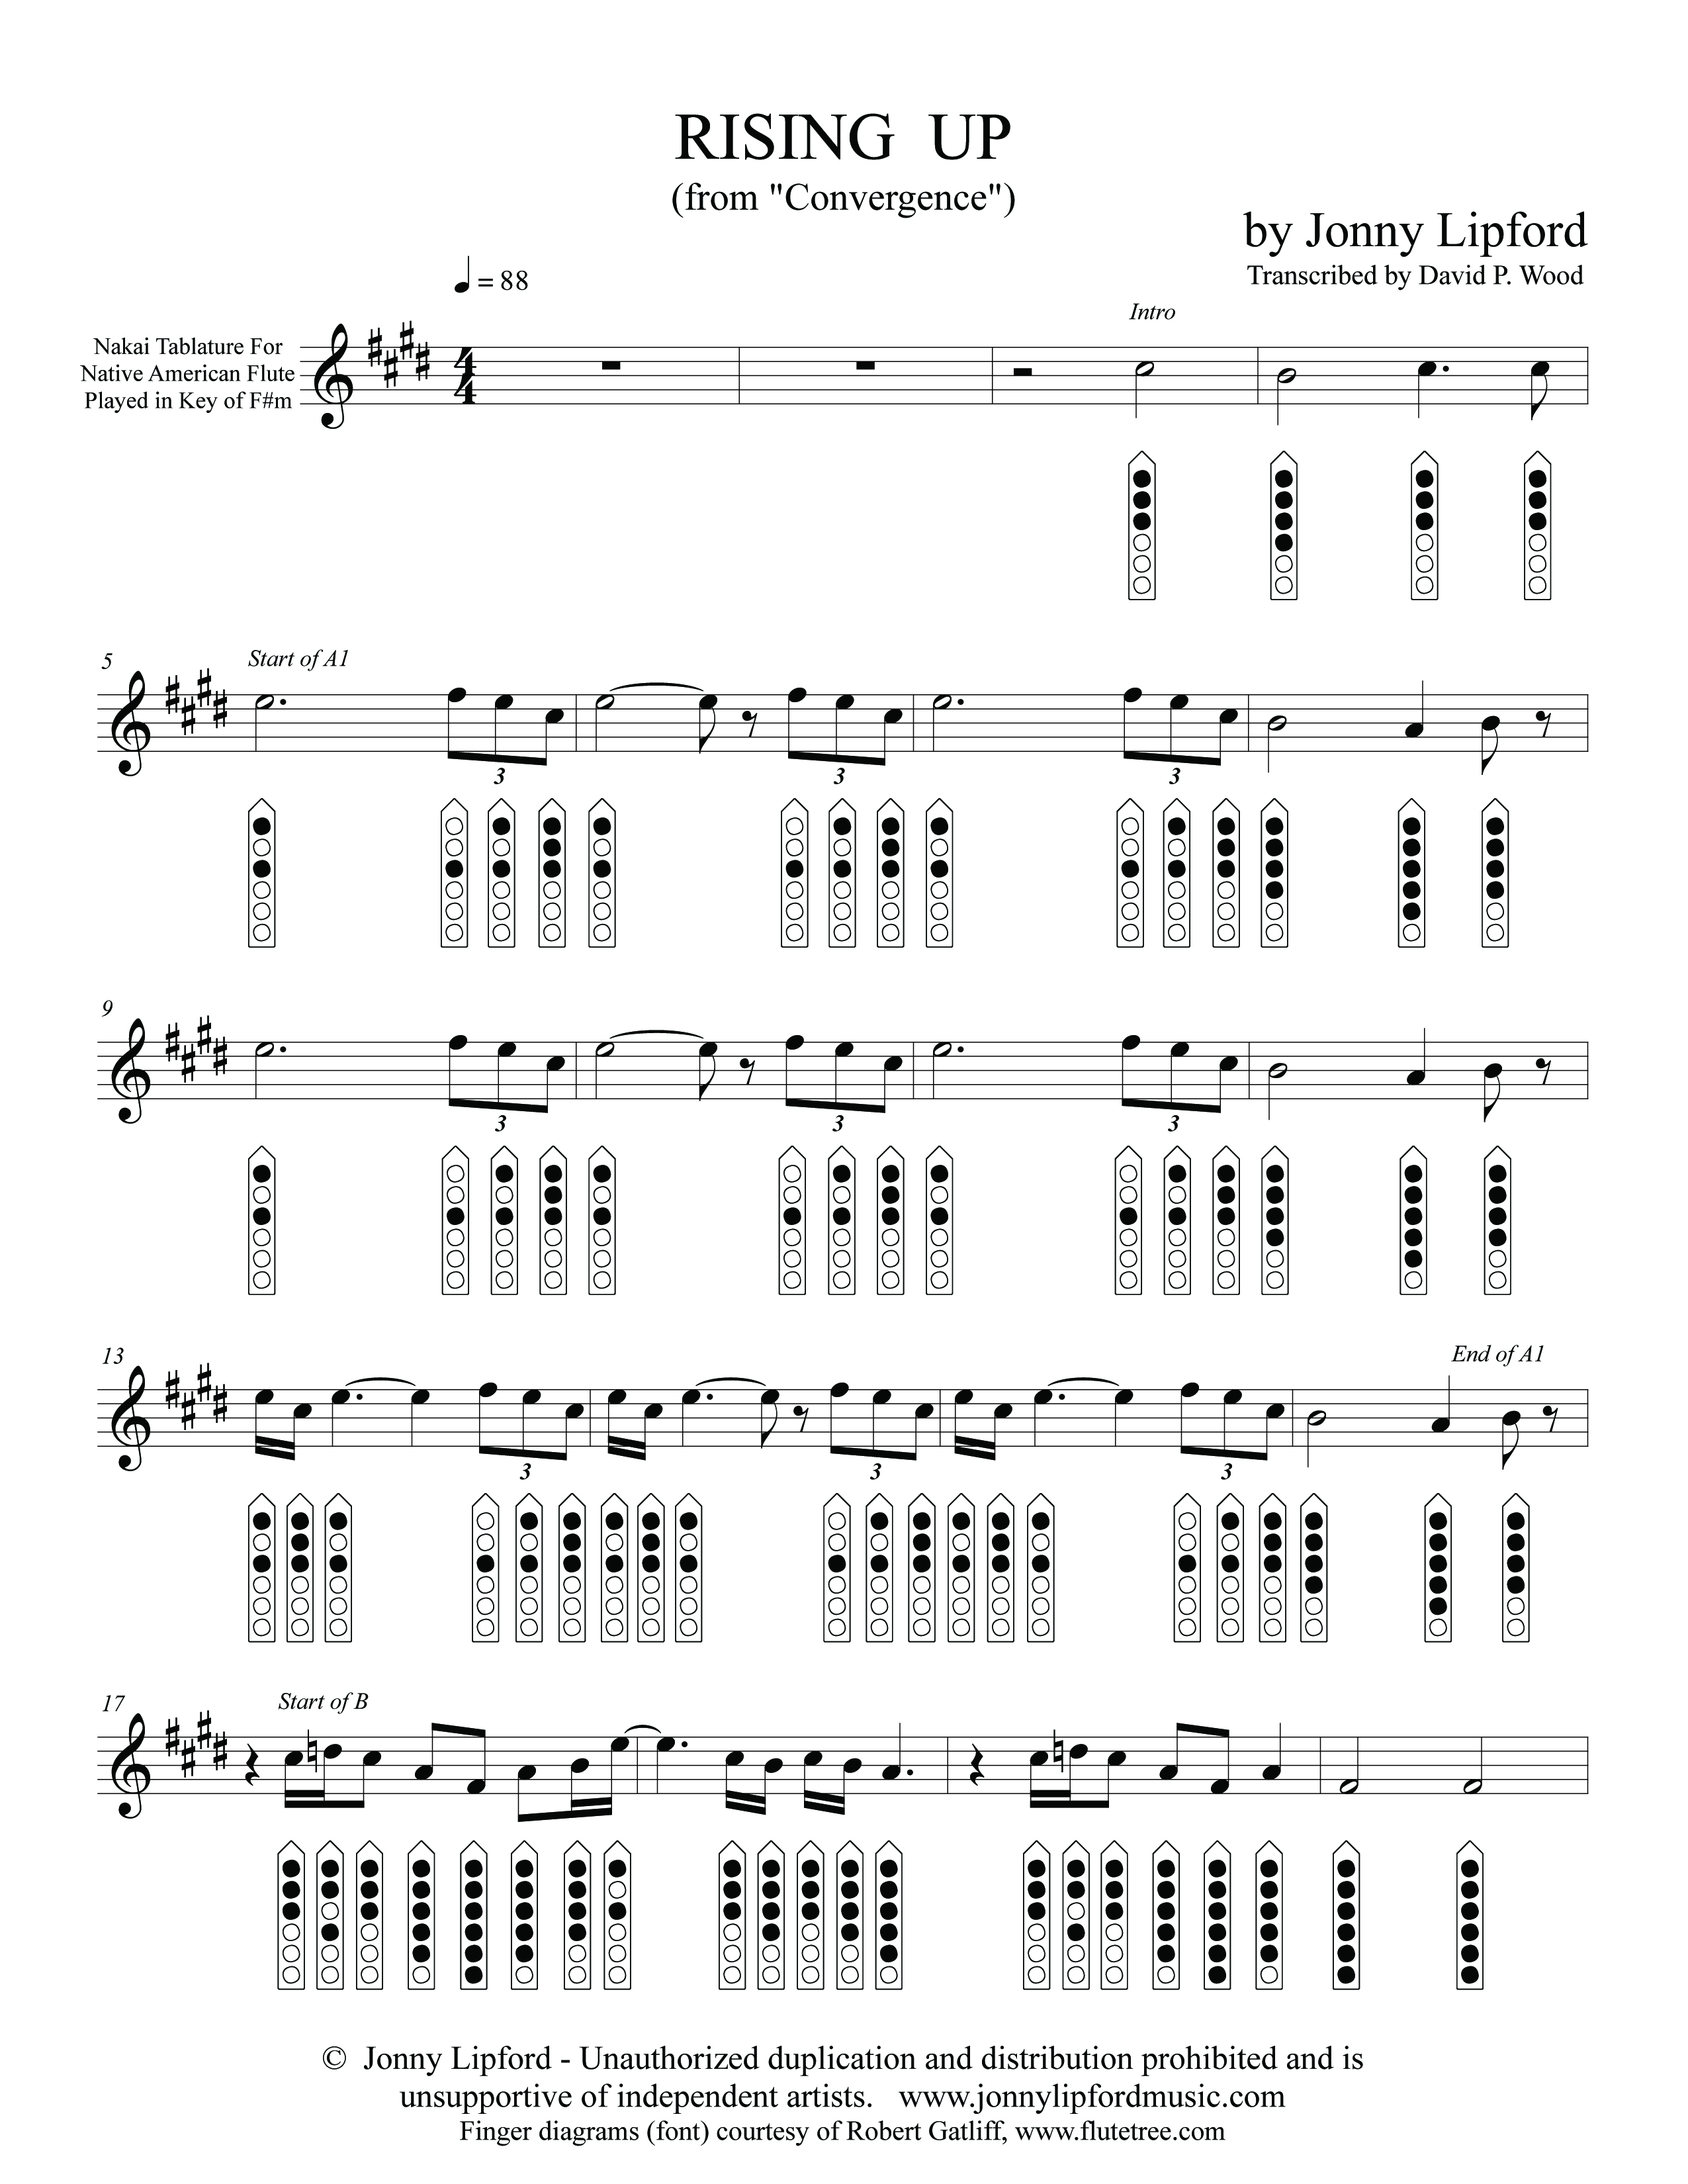 Rising Up Page 1 of 5 by Jonny Lipford for Native American Flute